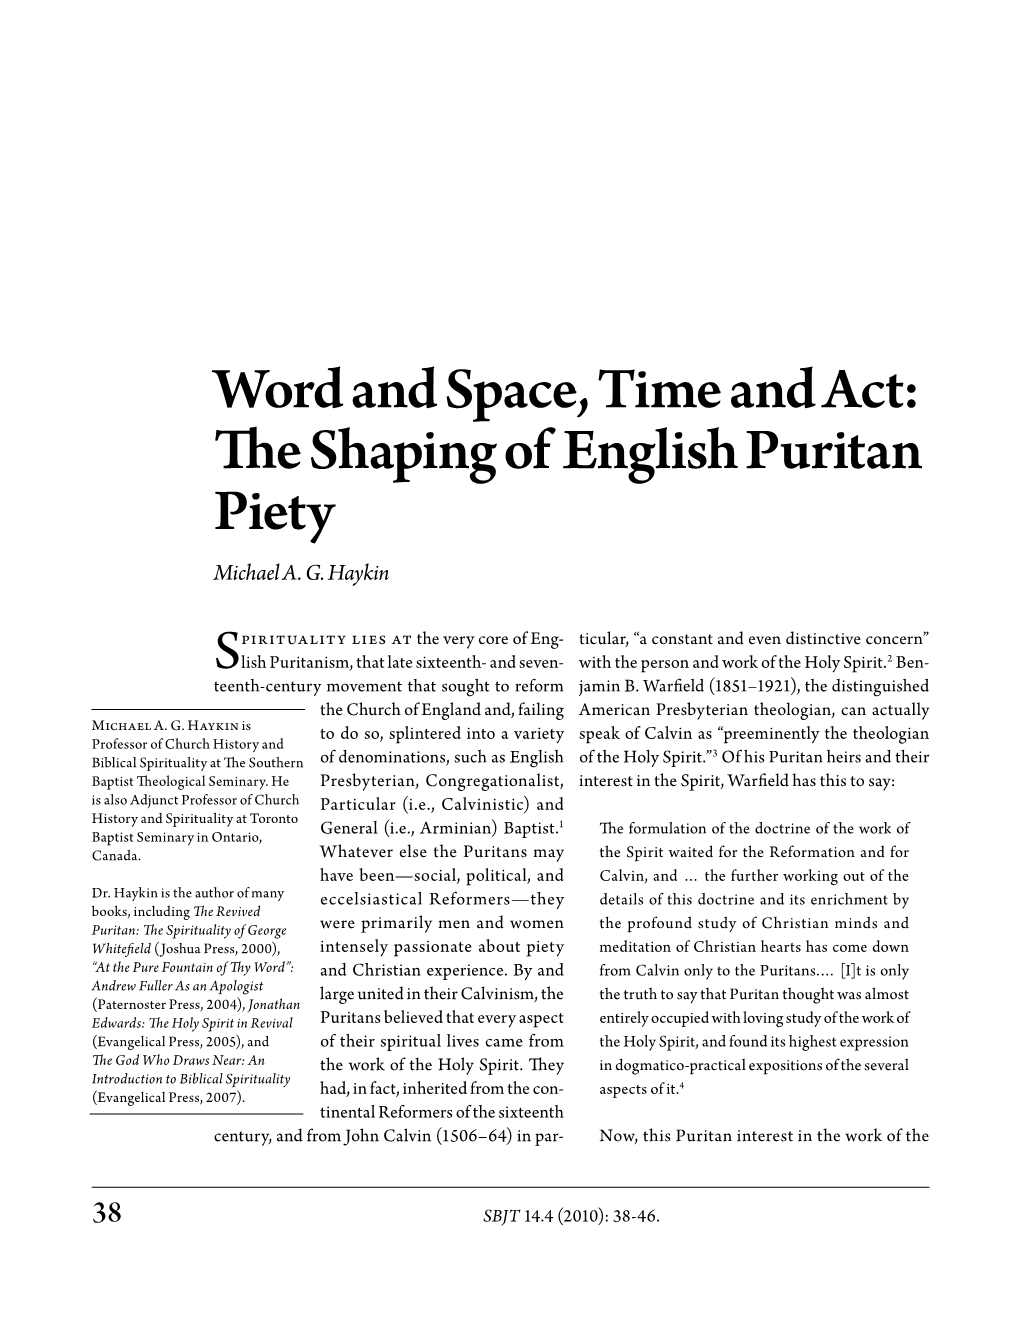 Word and Space, Time and Act: the Shaping of English Puritan Piety Michael A